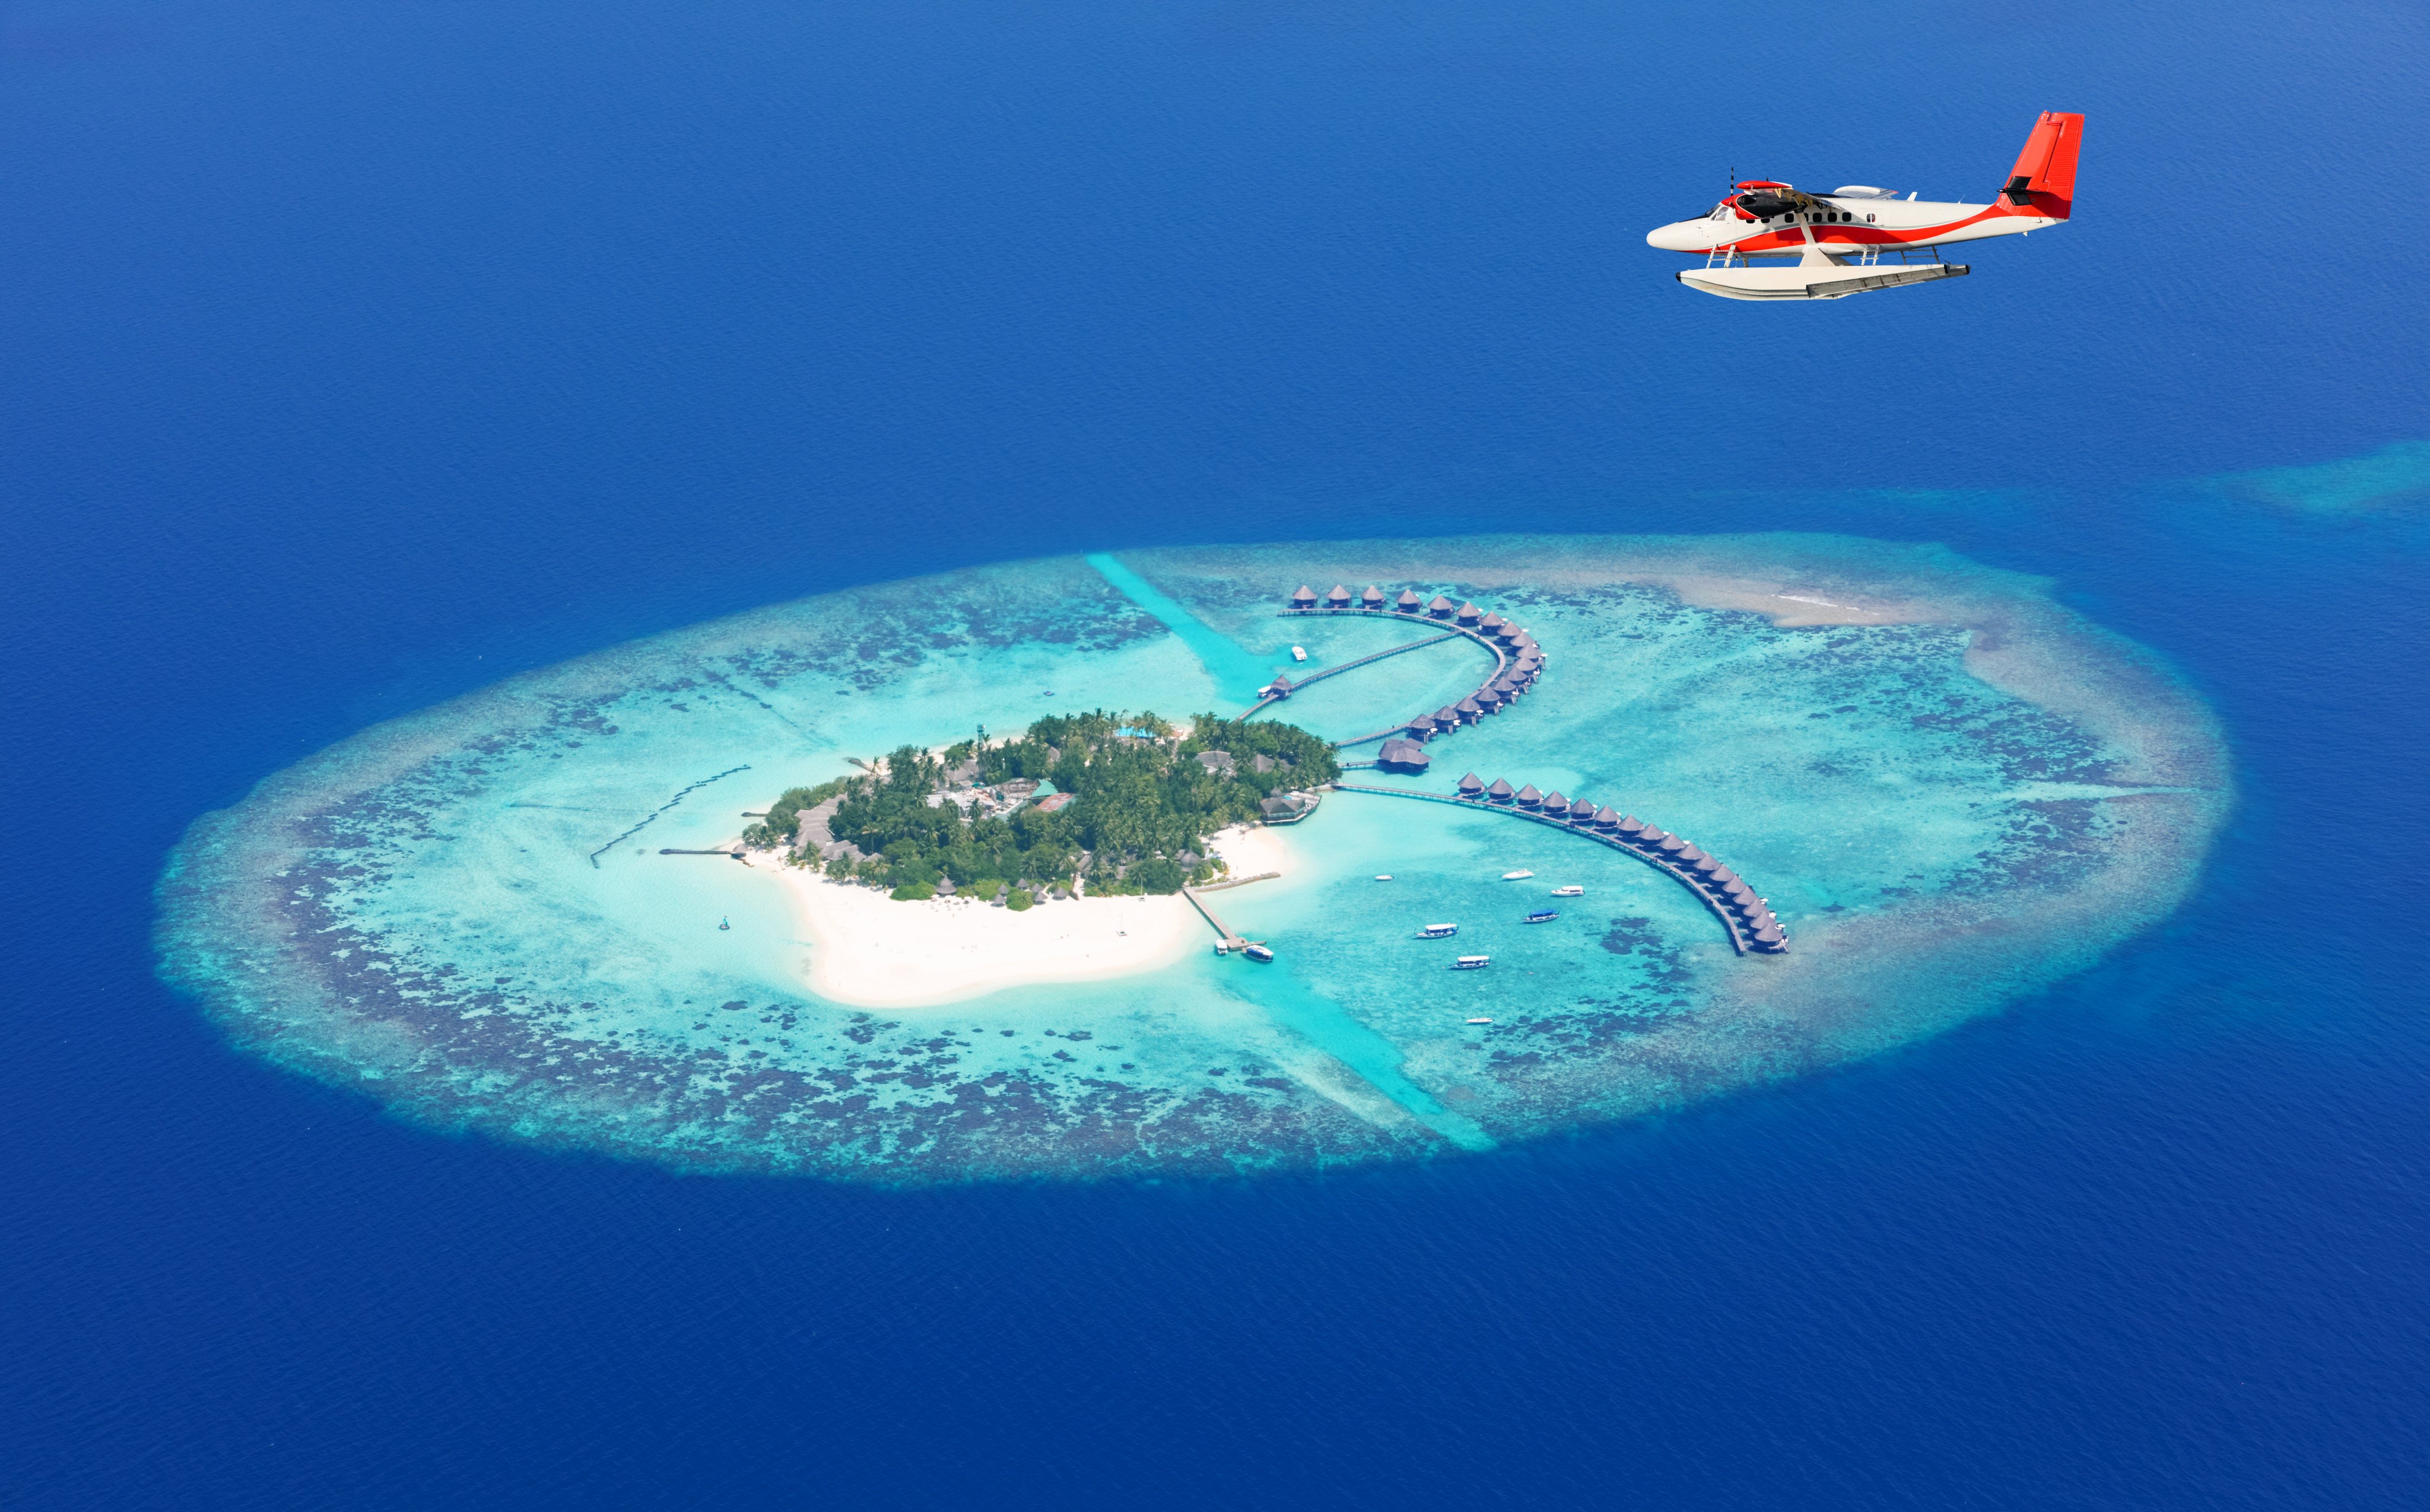 A holiday spot for celebrities from Taylor Swift to Tom Cruise to Britain’s Prince William and Kate Middleton, the Maldives has plenty to love about it - though Indians might presently disagree. Photo: Shutterstock